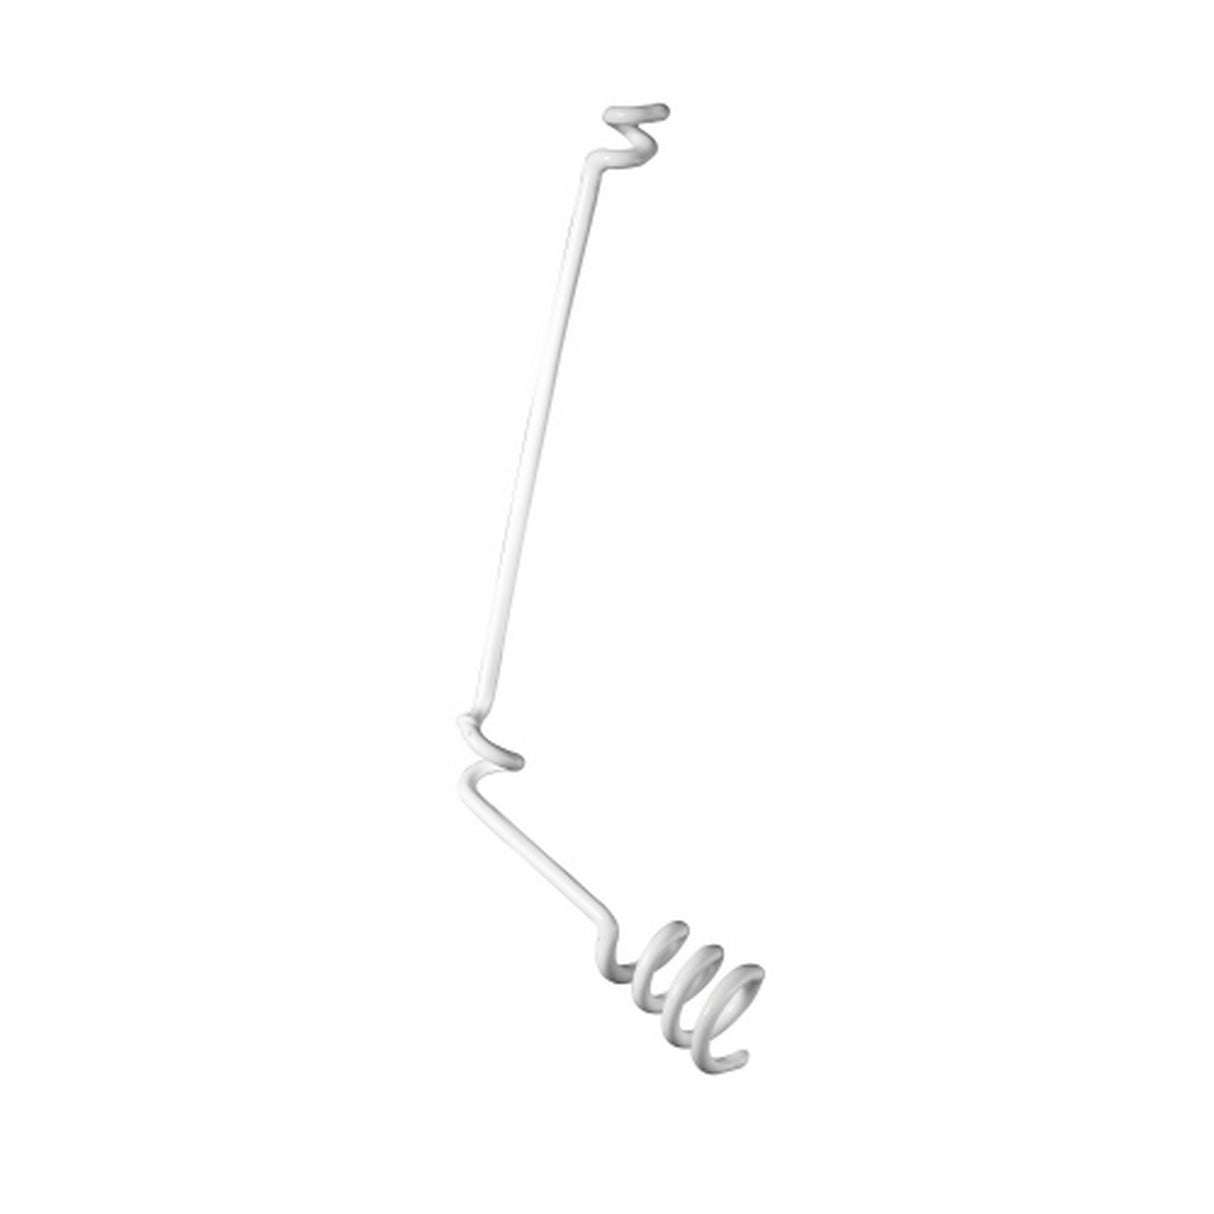 Audio-Technica AT8451-WH Microphone Hanger Adapter, White